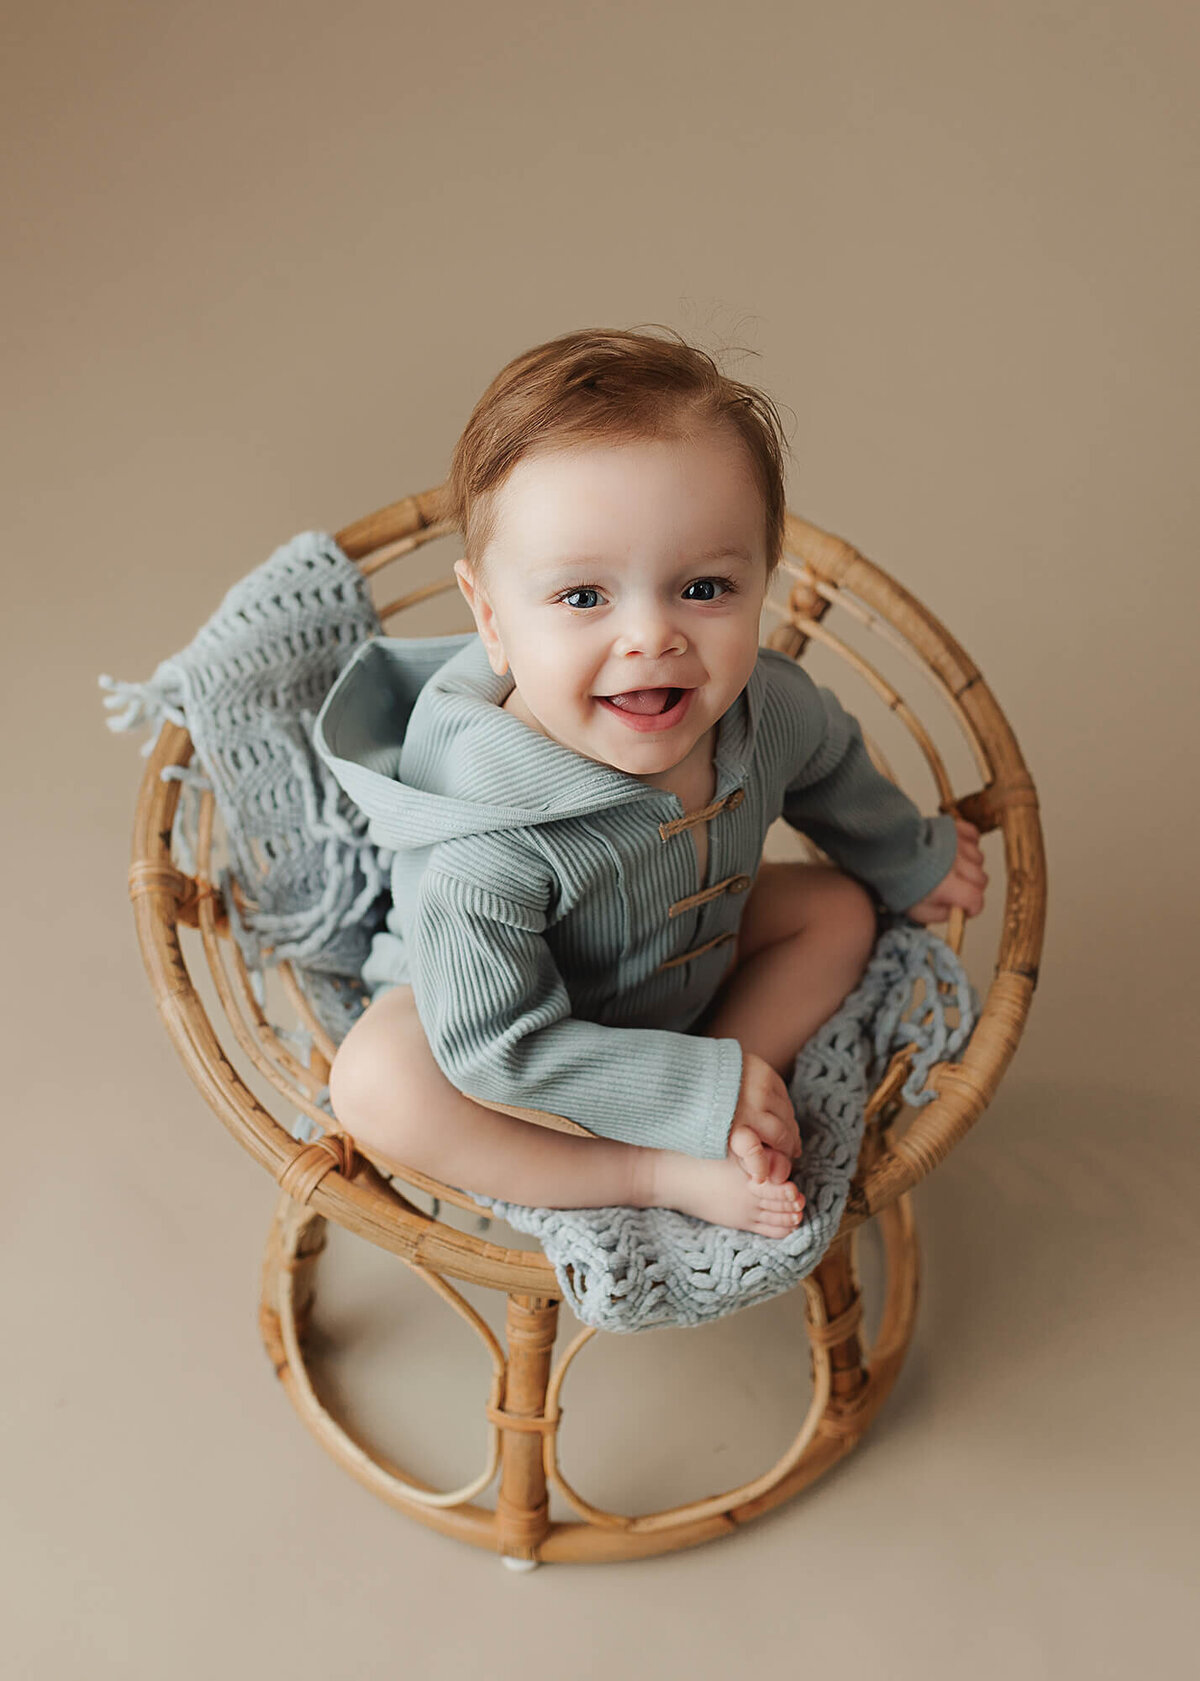 Beautiful little boy smiling during his baby photography session at Jennifer Brandes Photography.